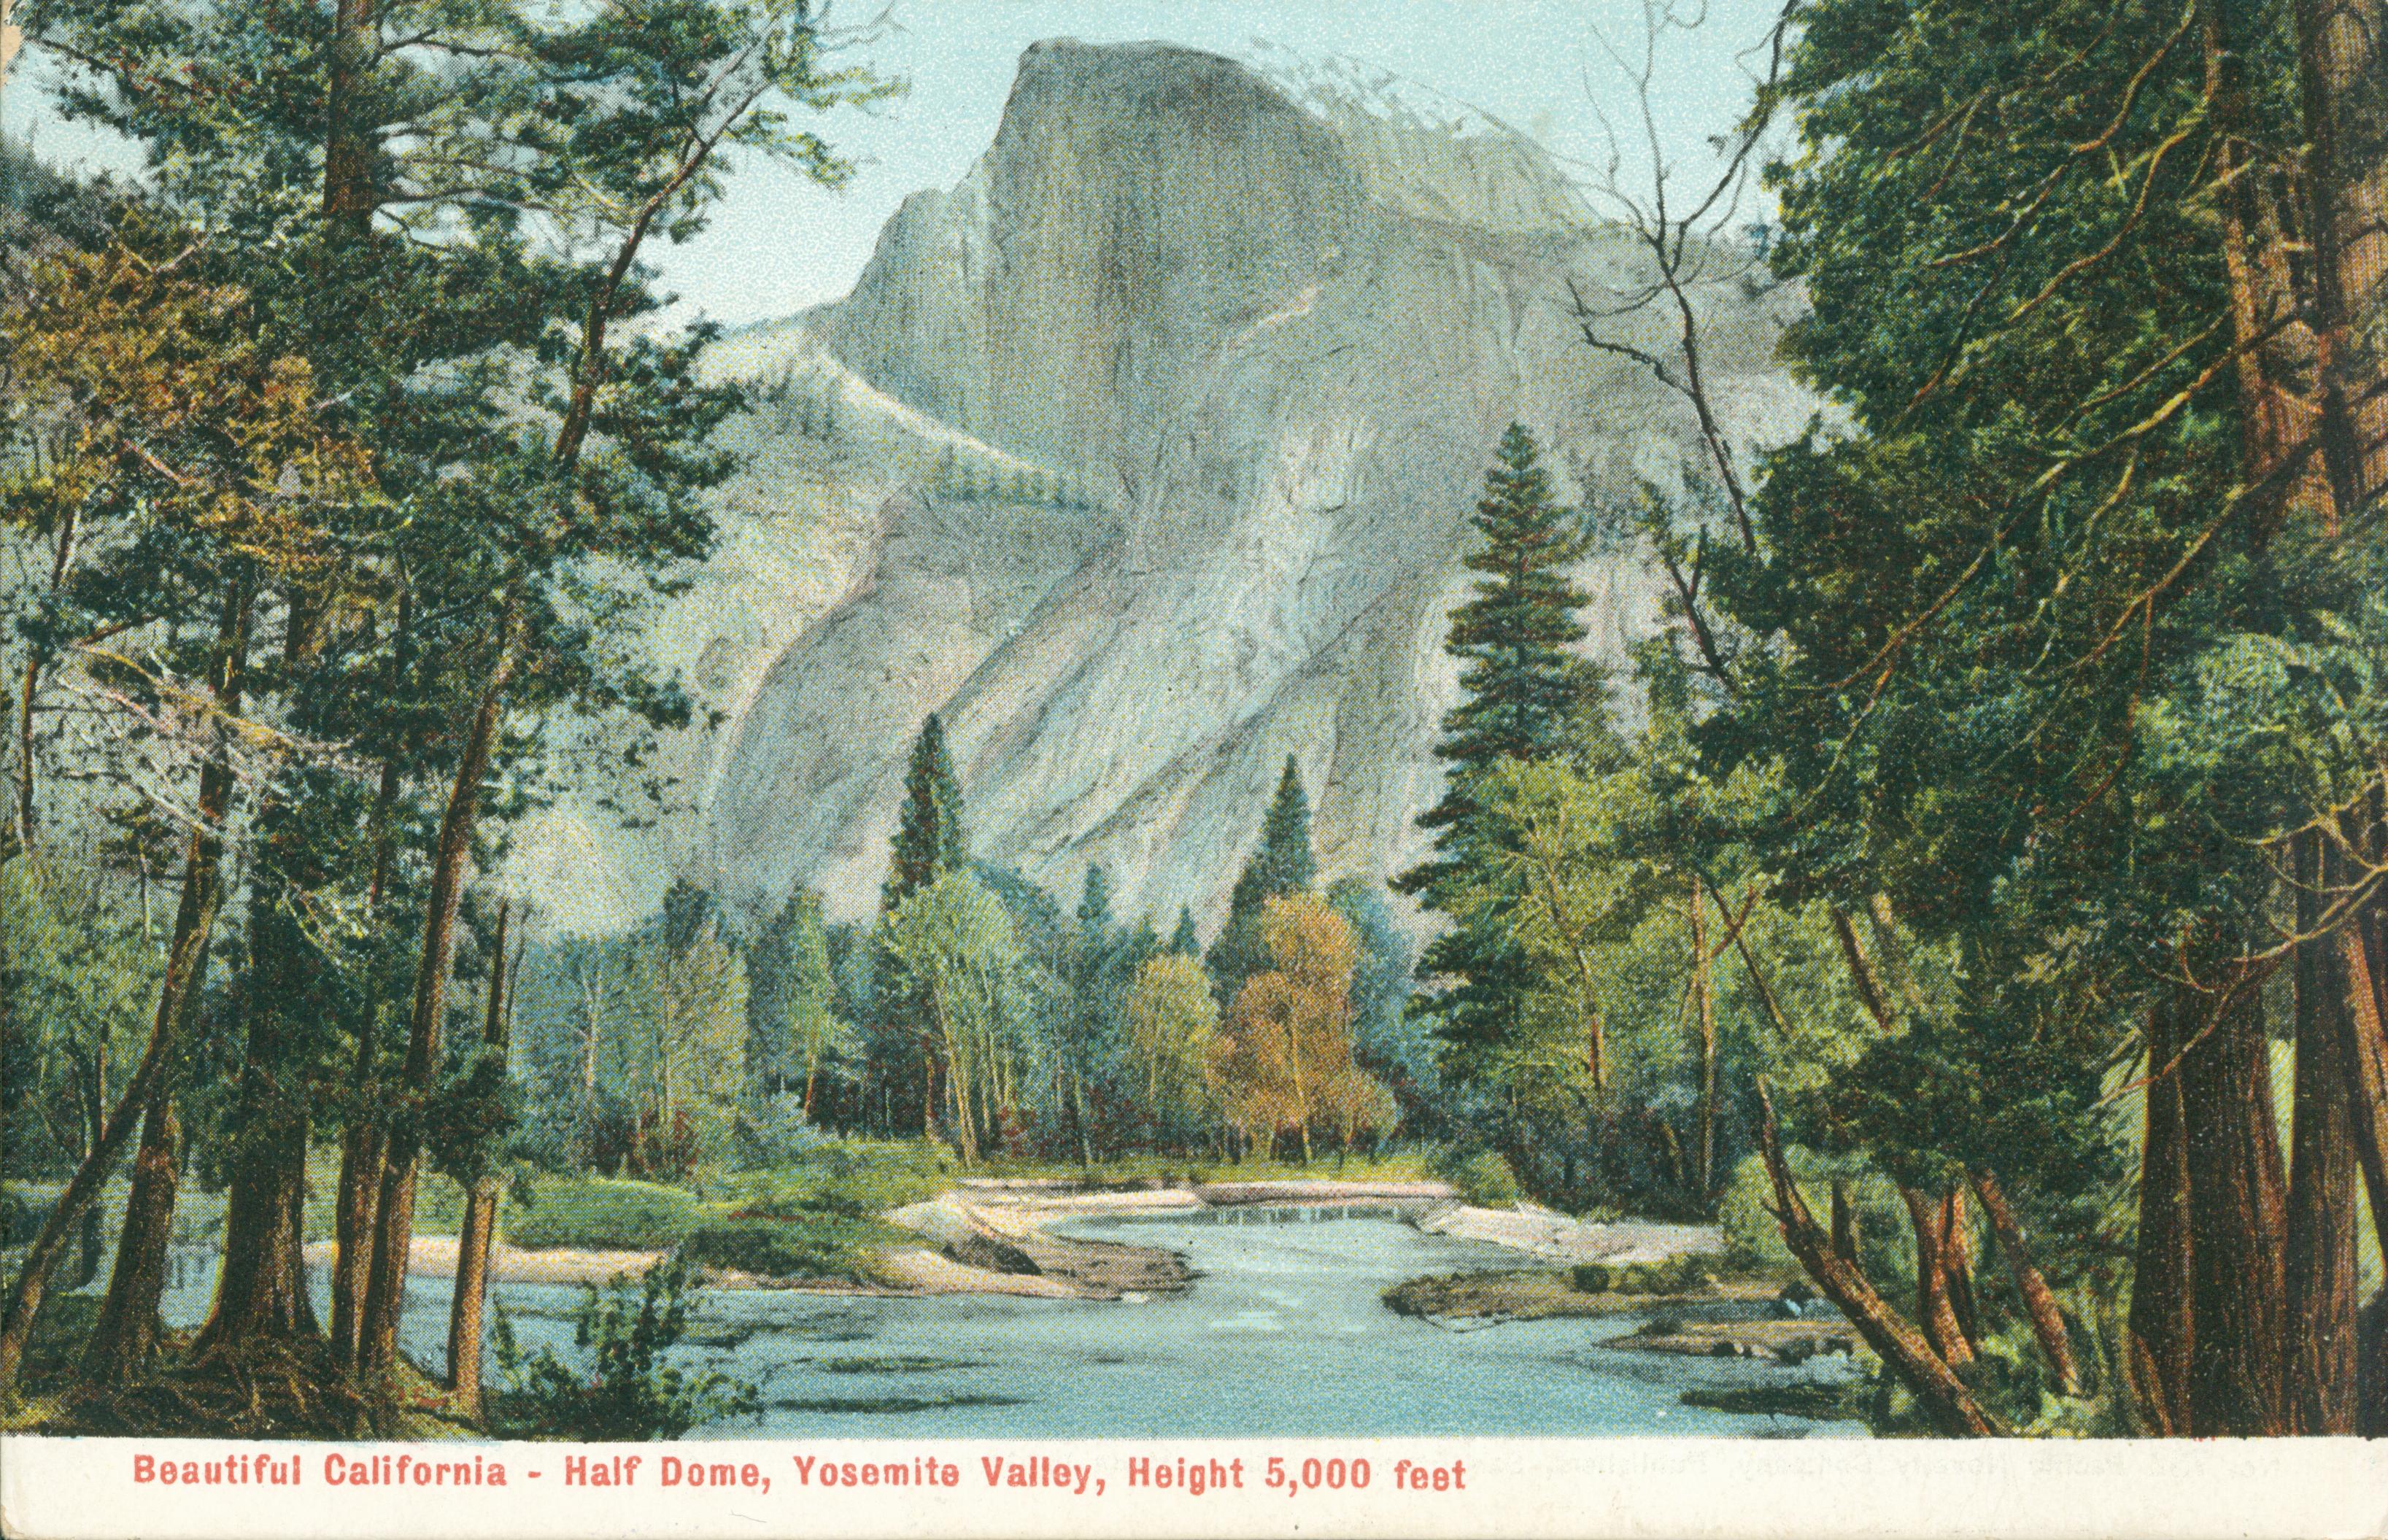 Shows Half Dome looming above a tree-lined river